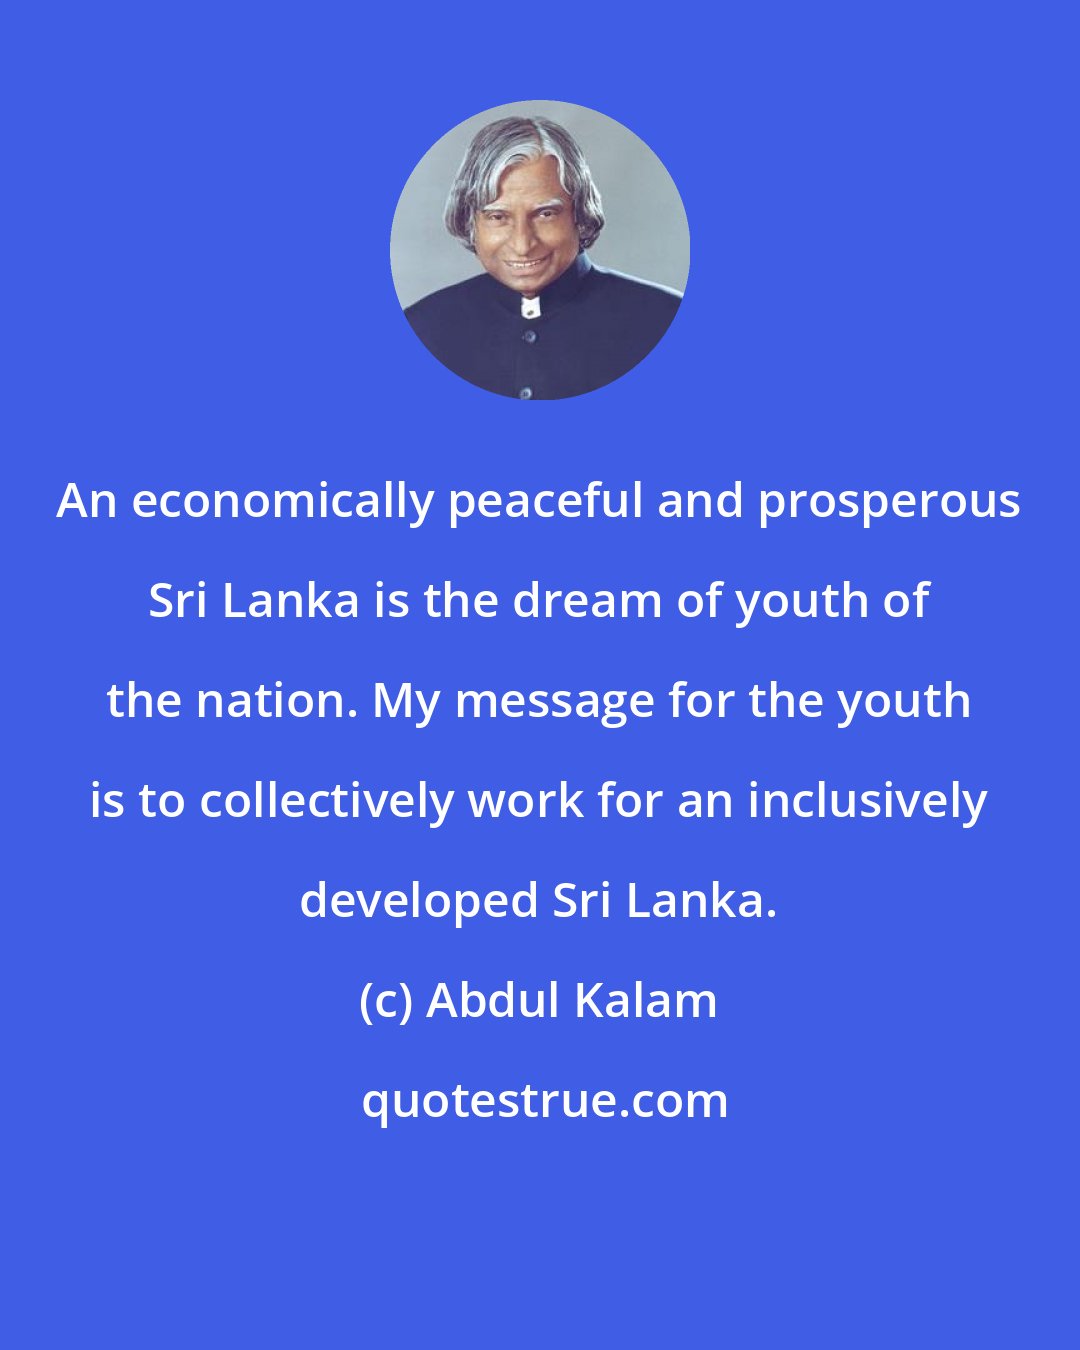 Abdul Kalam: An economically peaceful and prosperous Sri Lanka is the dream of youth of the nation. My message for the youth is to collectively work for an inclusively developed Sri Lanka.